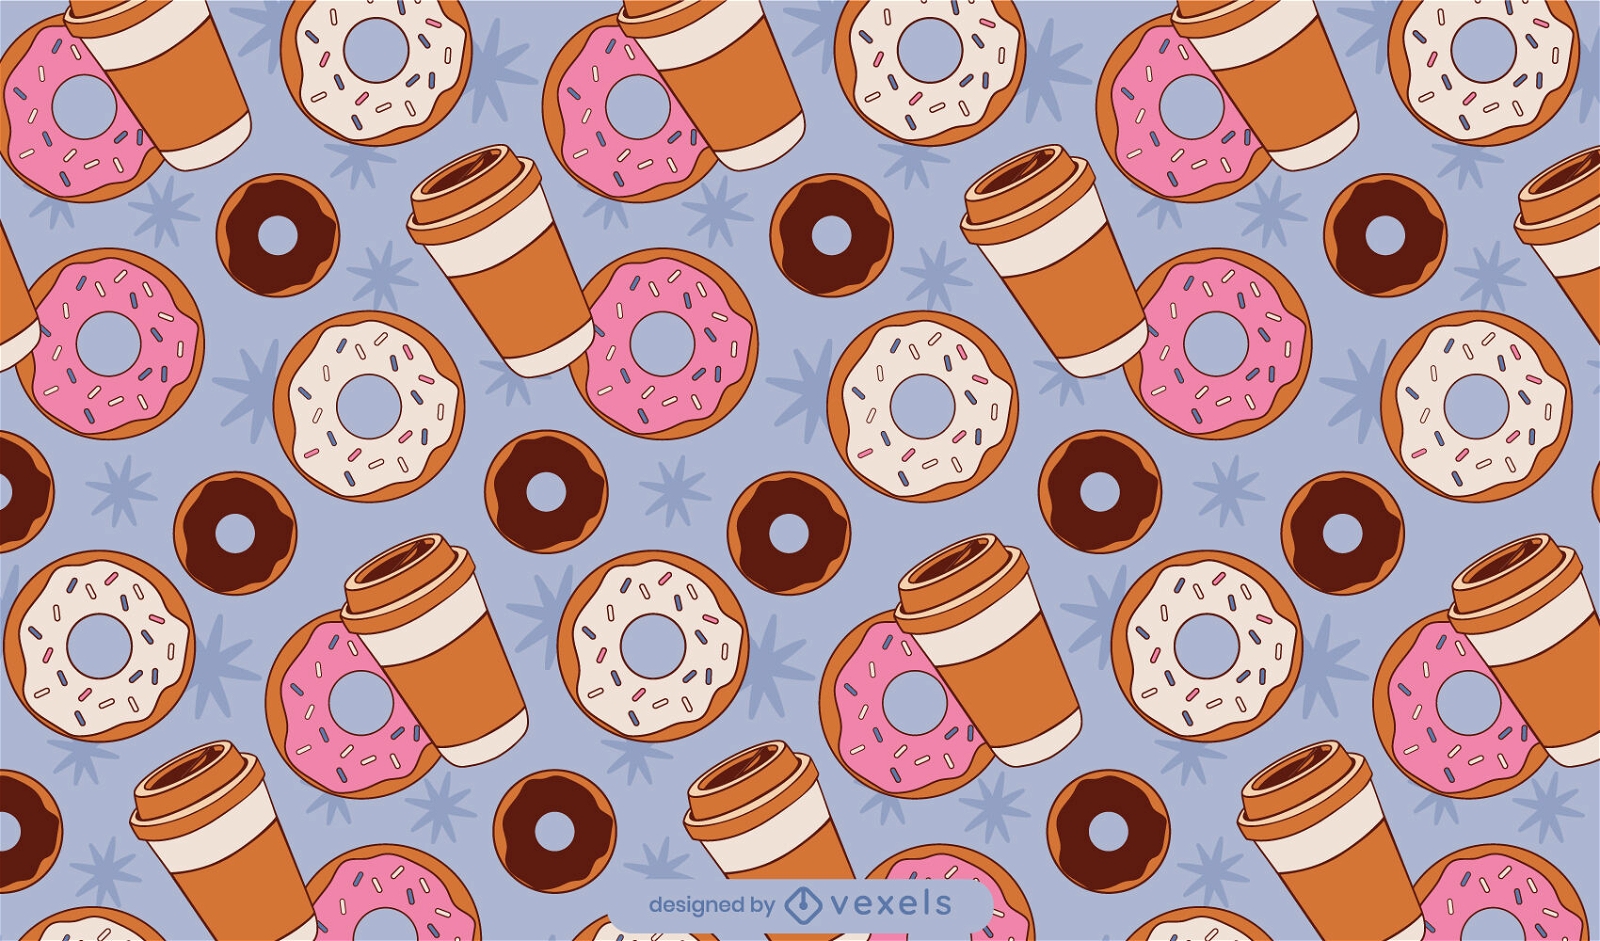 Coffee and donuts food pattern design